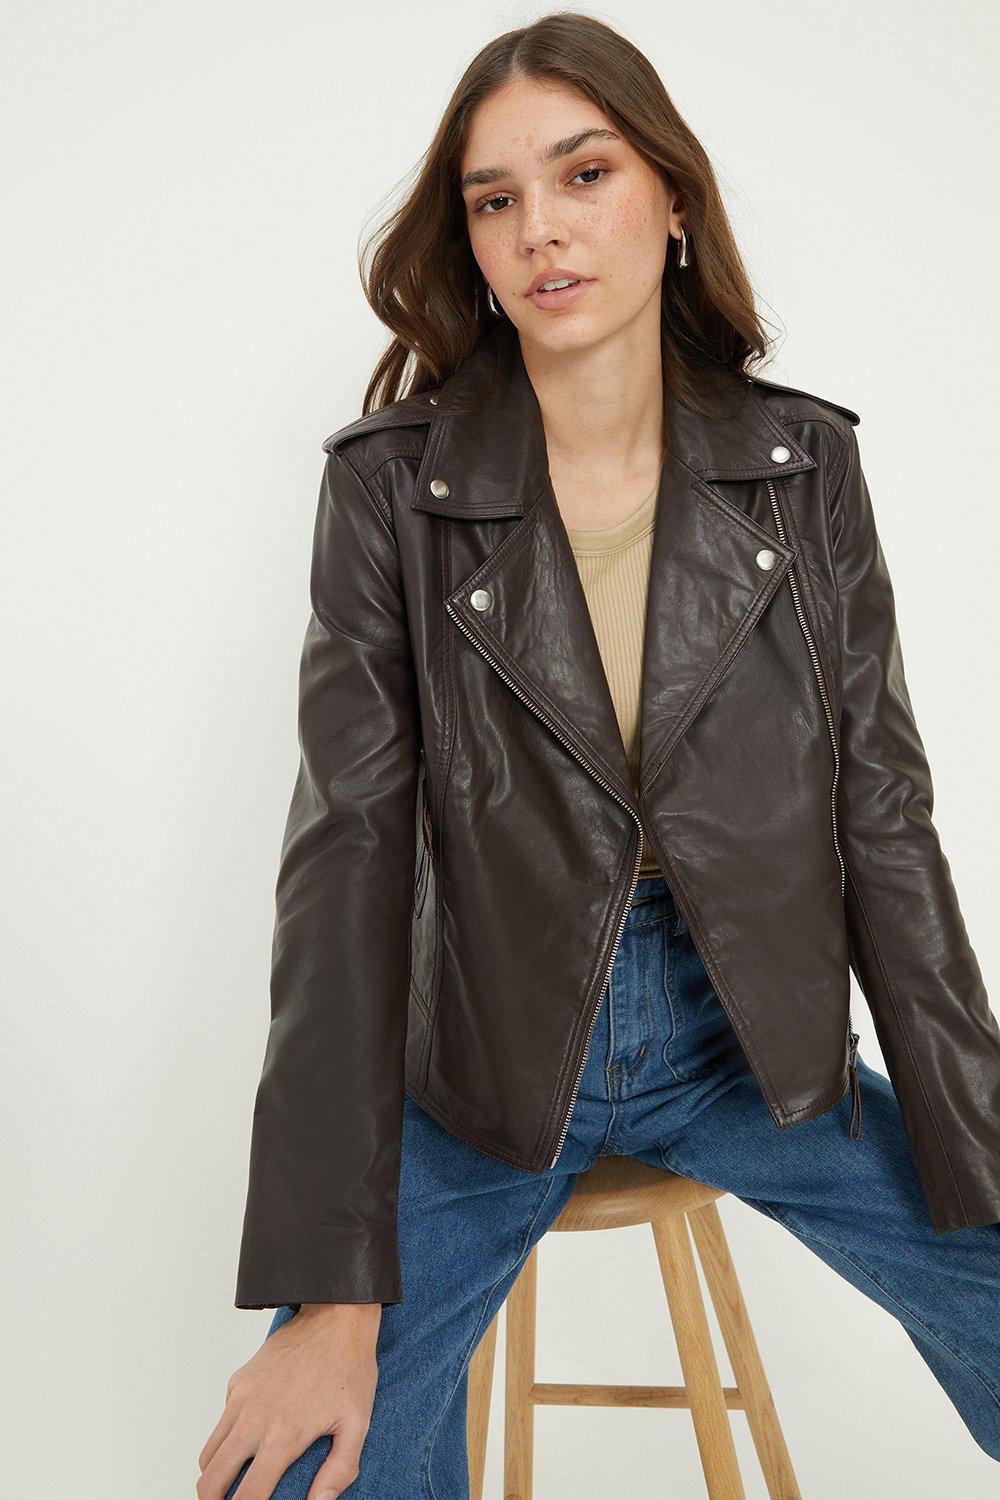 Women’s Boxy Cropped Real Leather Jacket - dark brown - L